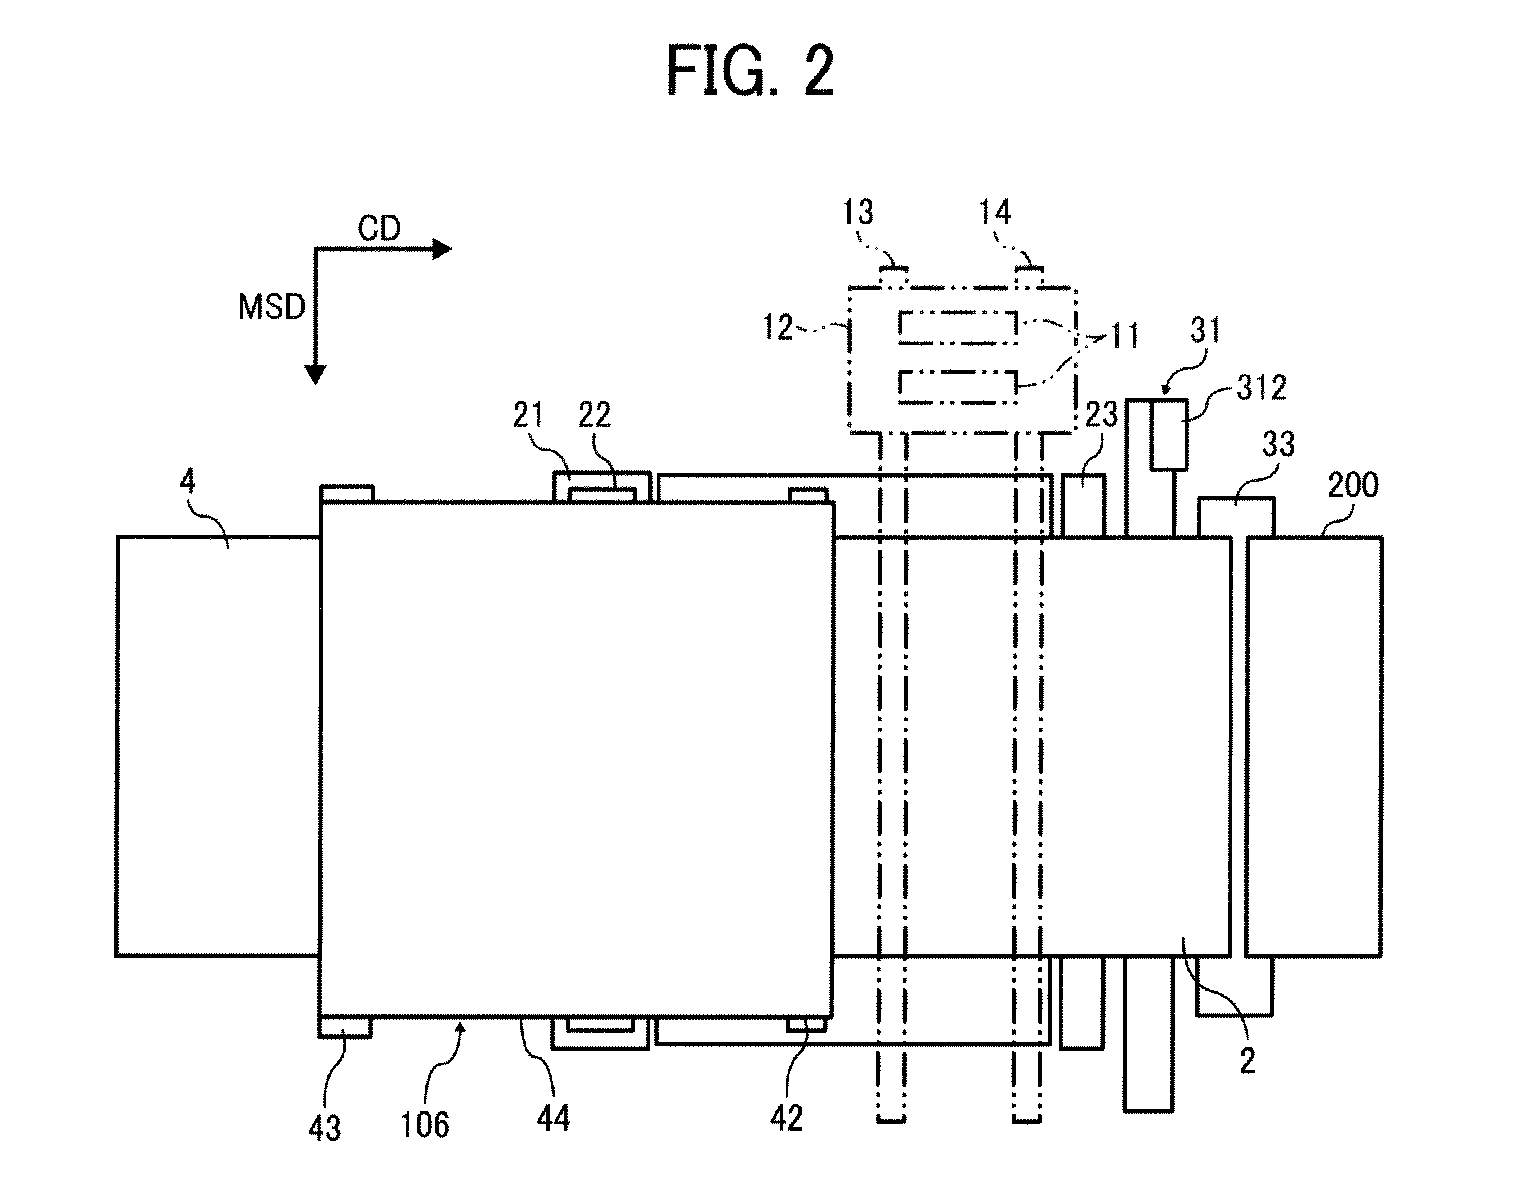 Image forming apparatus forming an image on adhesive face of print medium